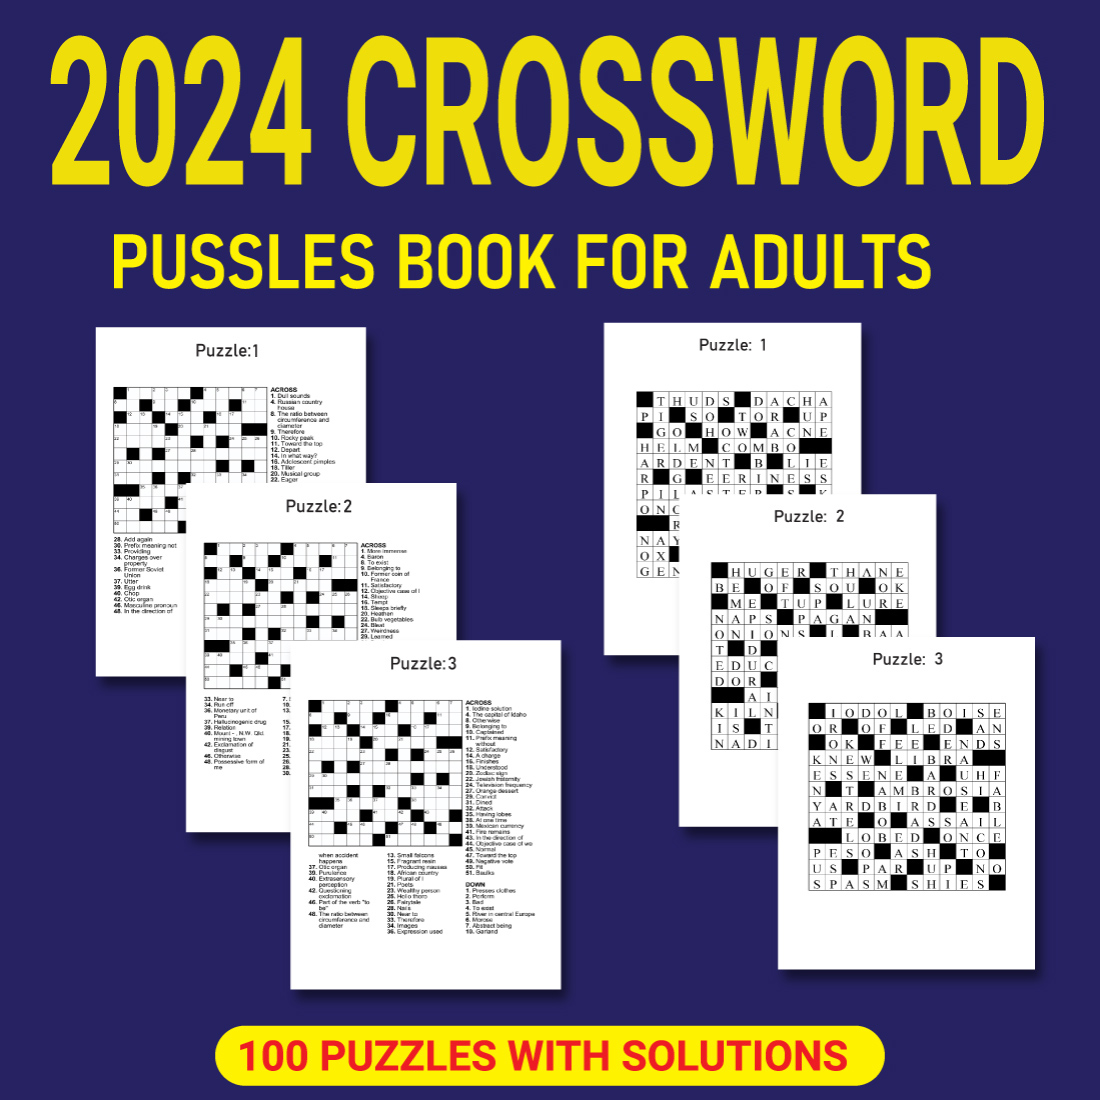 2024 Crossword Puzzles Book For Adults preview image.